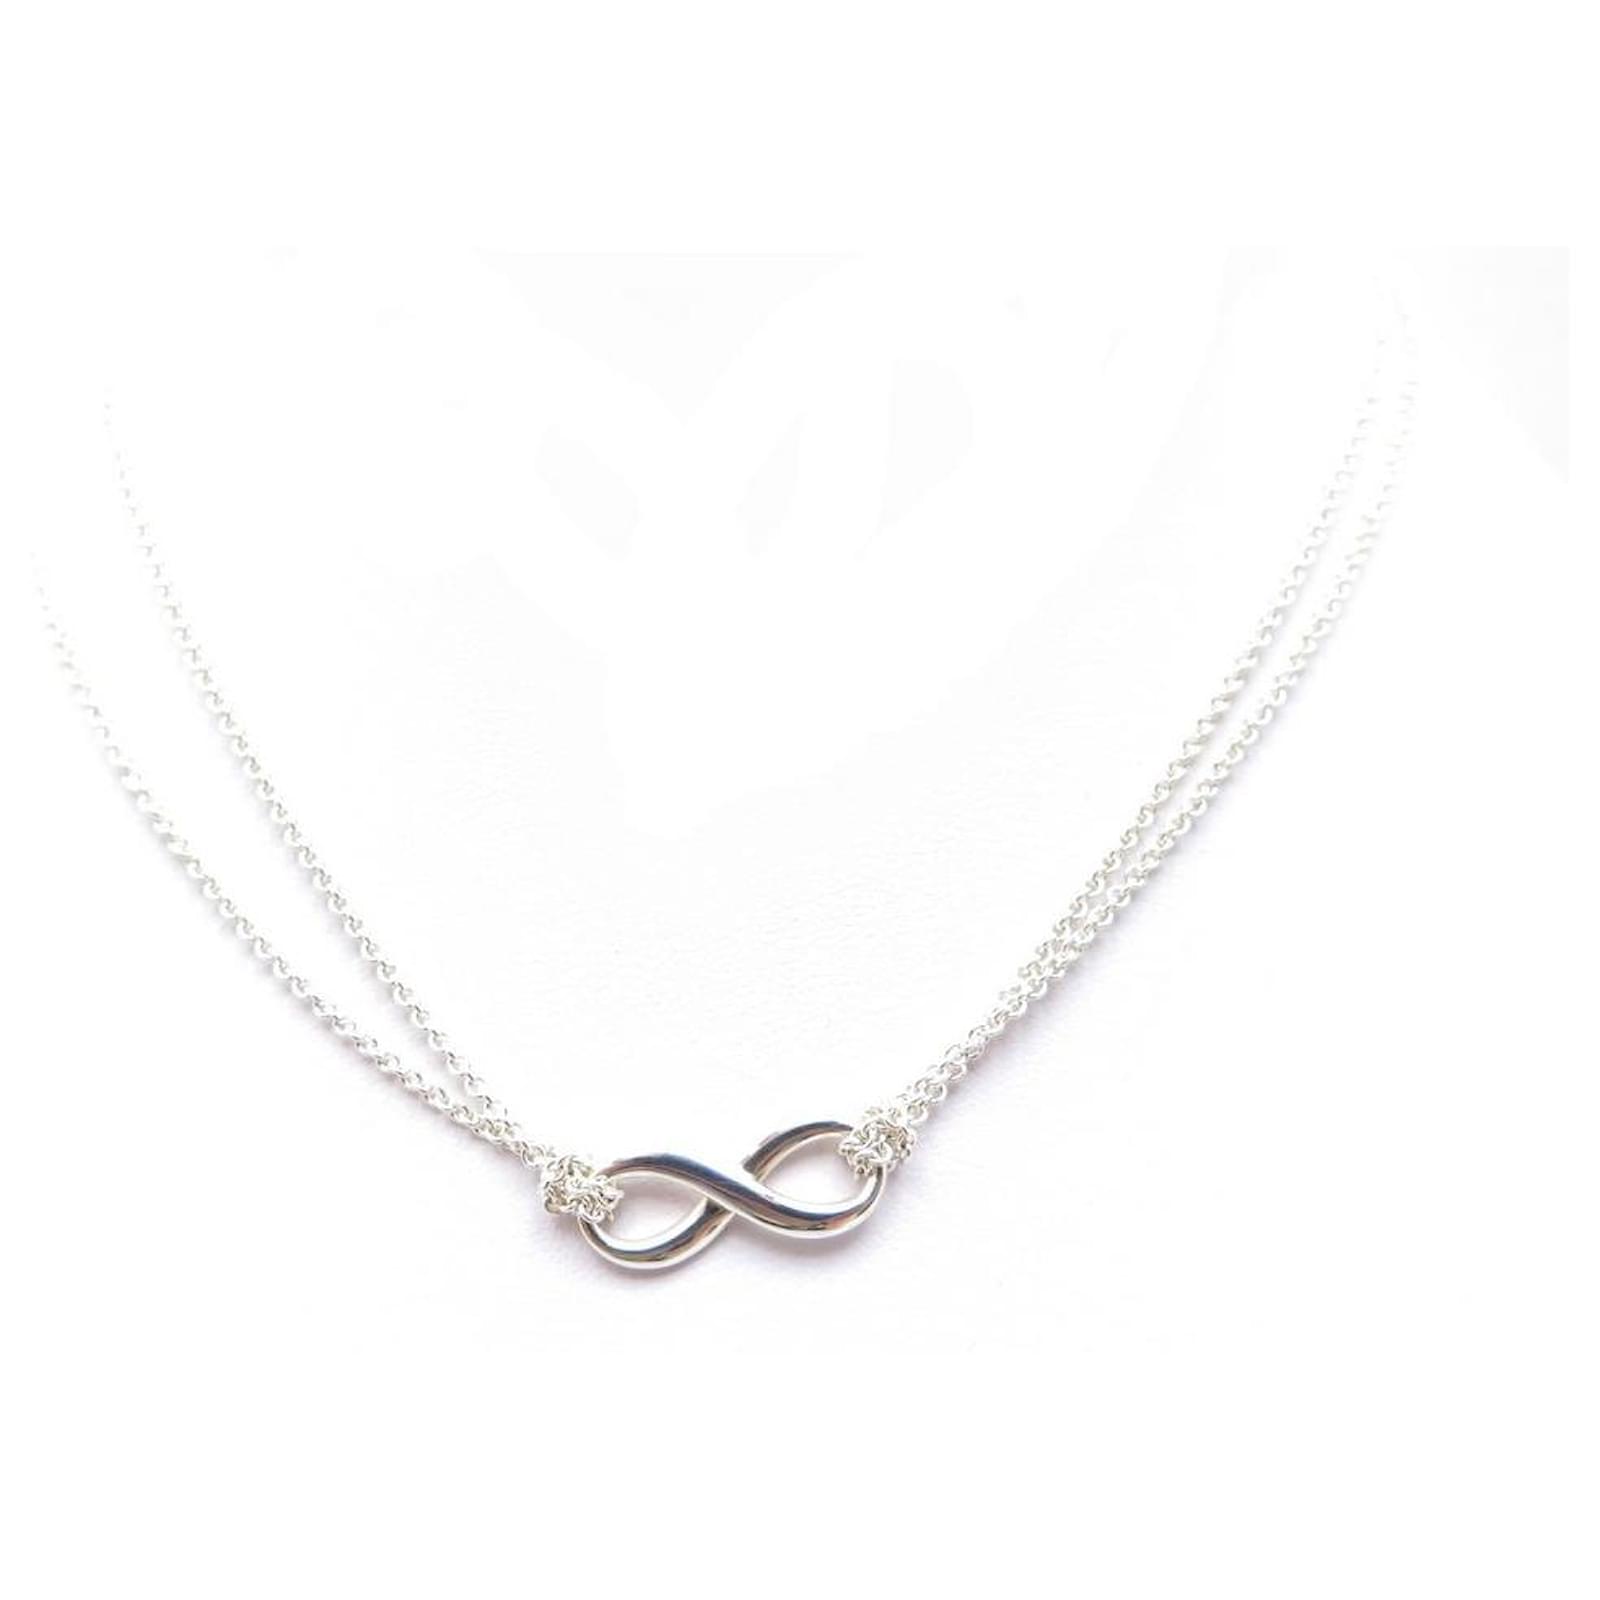 TIFFANY & CO INFINITY PENDANT NECKLACE 40 CM SOLID SILVER 925